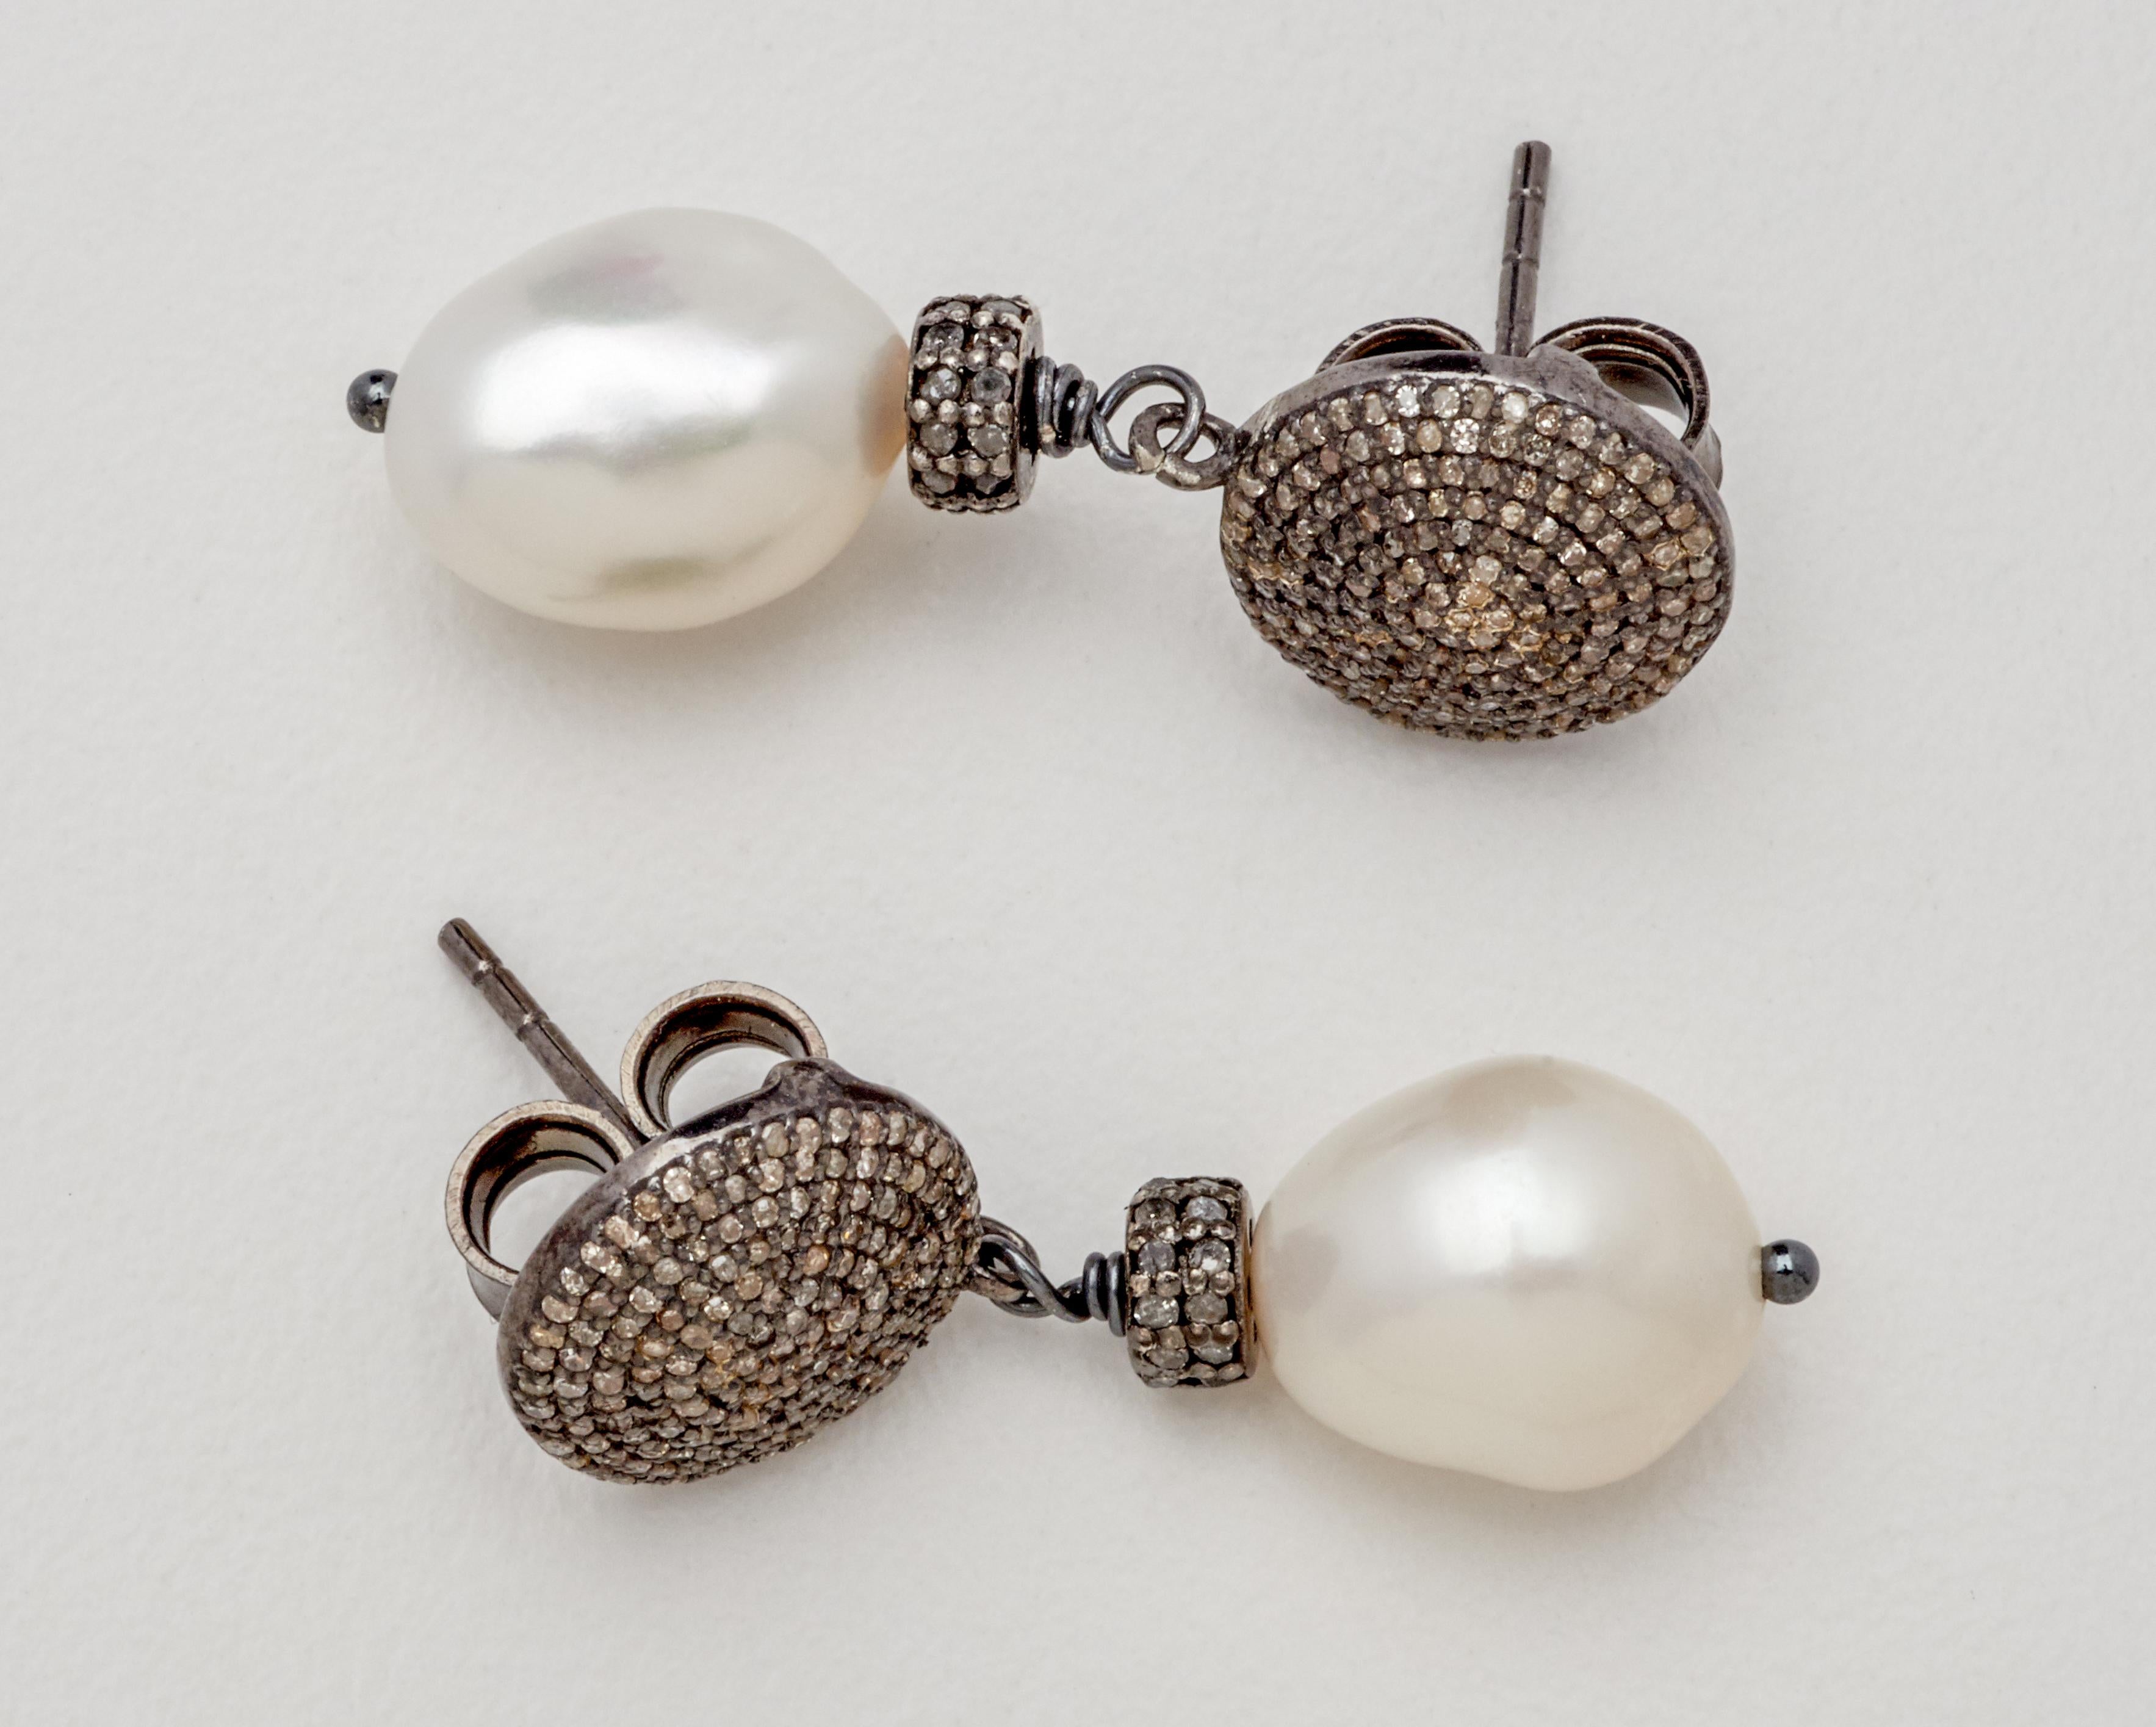 Simply elegant earrings for every special occasion. Each has an artful, naturally shaped white 9 mm x 12 mm baroque pearl drop giving the pair tasteful movement. Newly crafted of diamond encrusted round sterling silver button studs measuring one